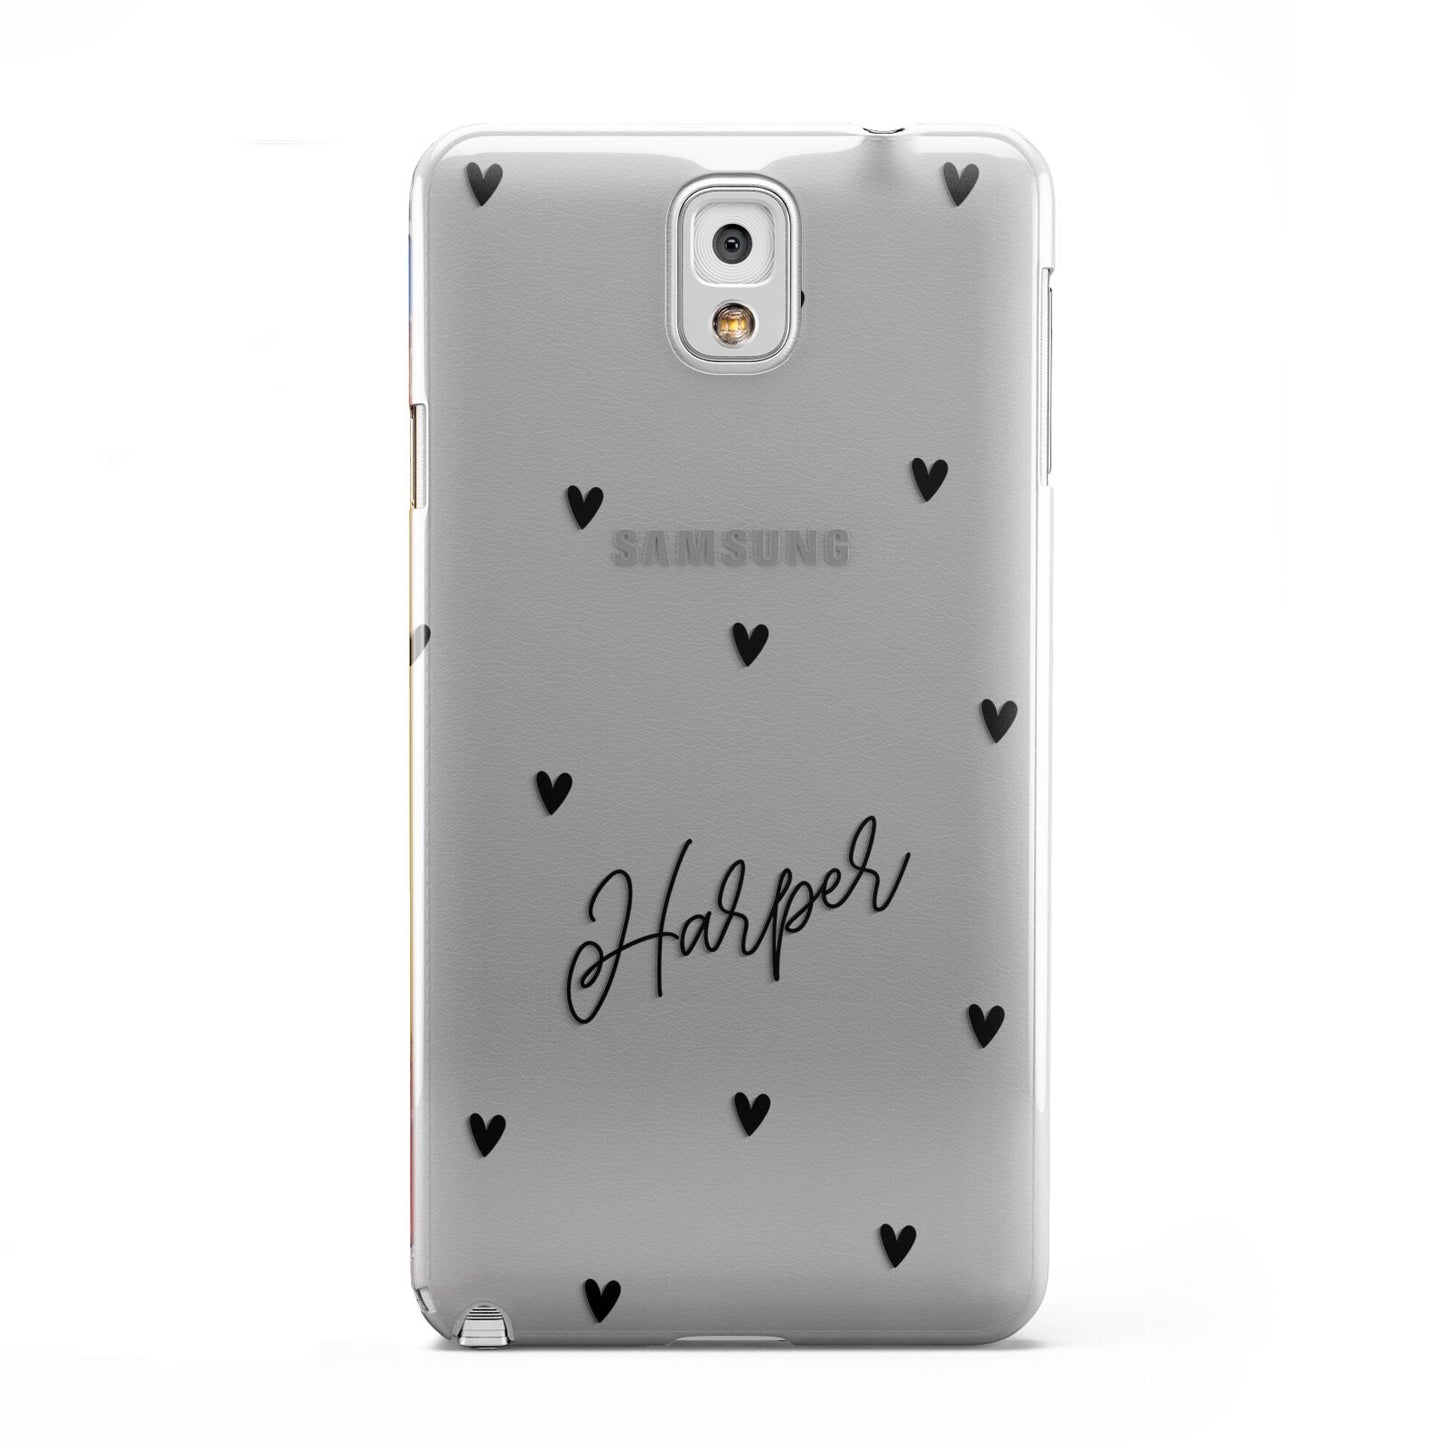 Personalised Heart Samsung Galaxy Note 3 Case